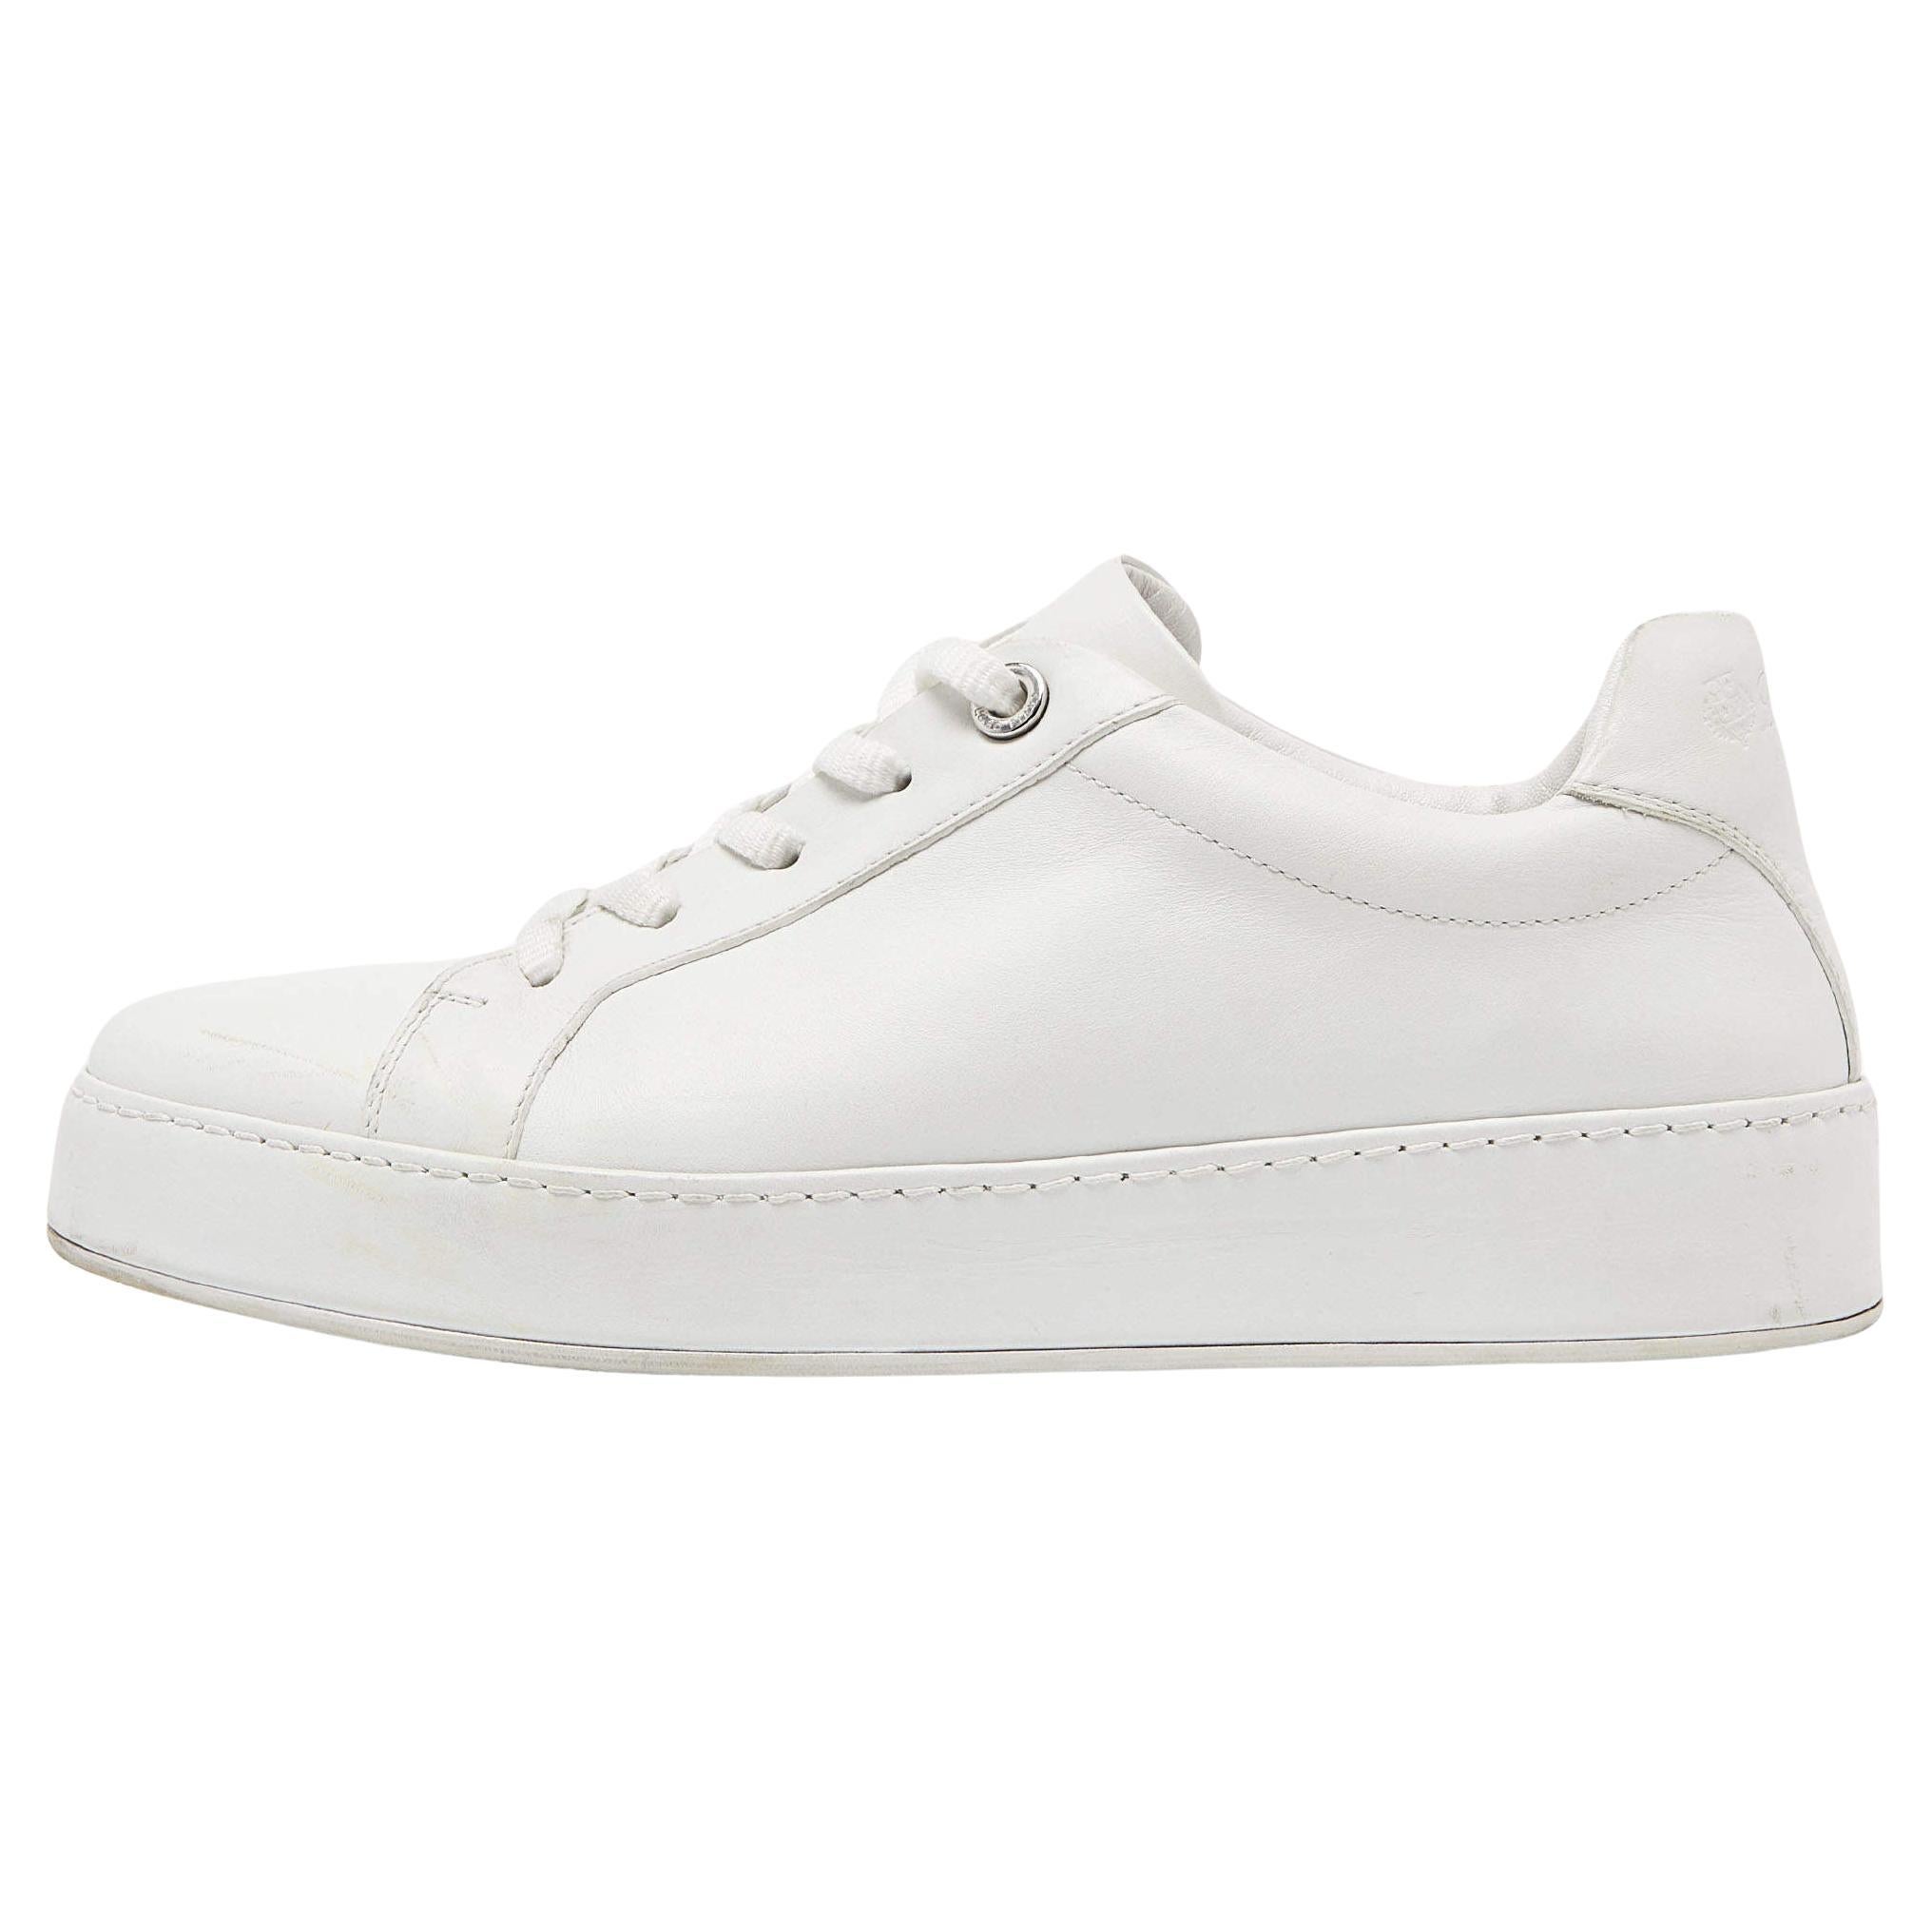 Loro Piana White Leather Nuages Sneakers Size 37.5